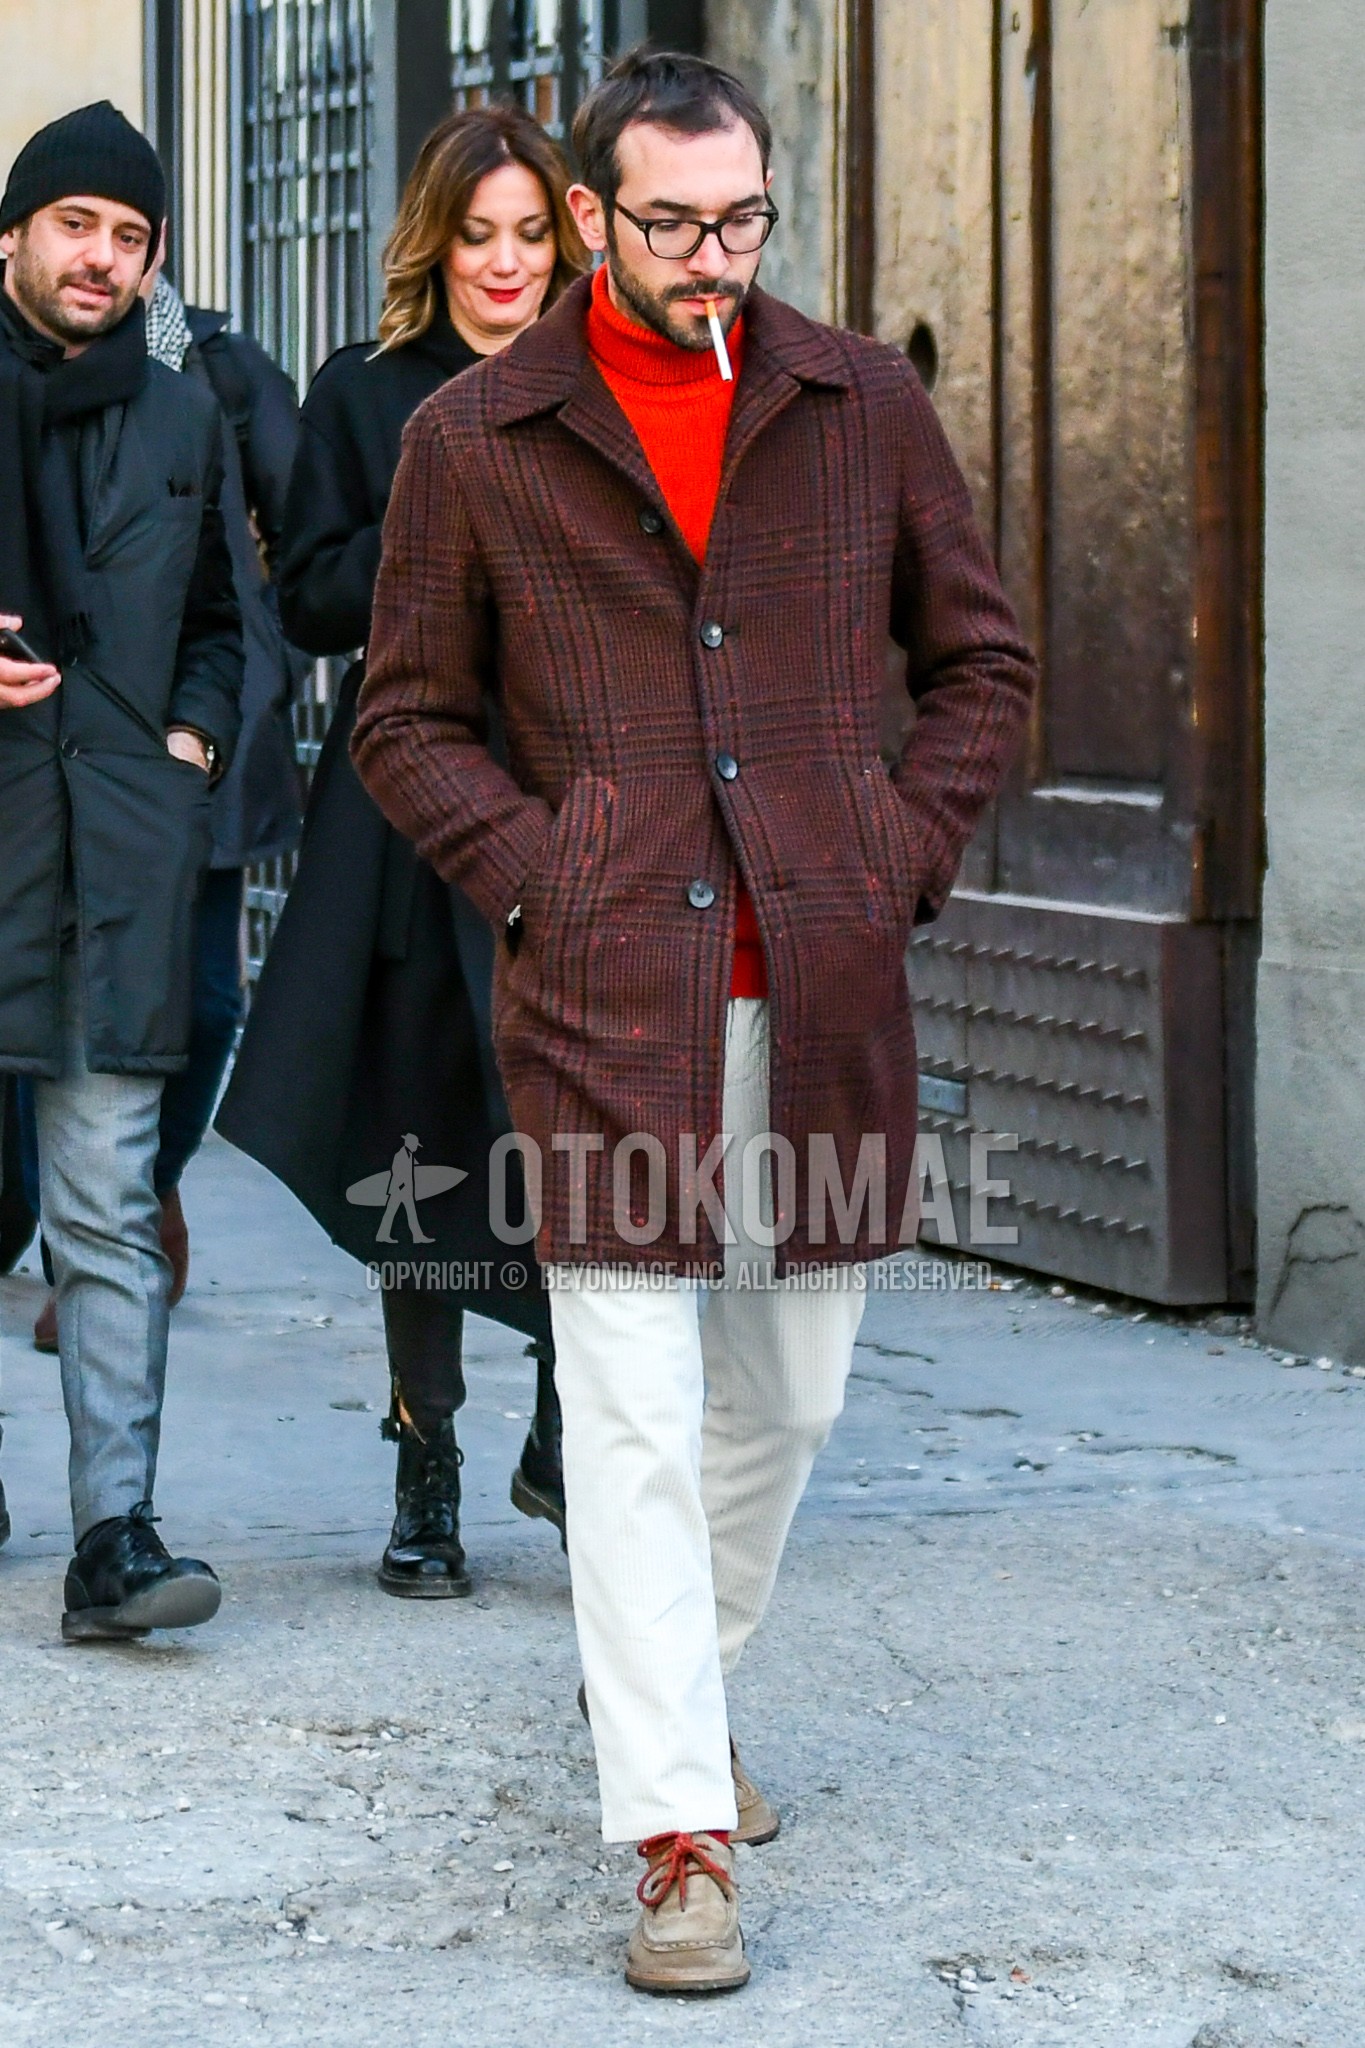 Men's autumn winter outfit with brown tortoiseshell glasses, brown check stenkarrer coat, red plain turtleneck knit, white plain winter pants (corduroy,velour), beige moccasins/deck shoes leather shoes.